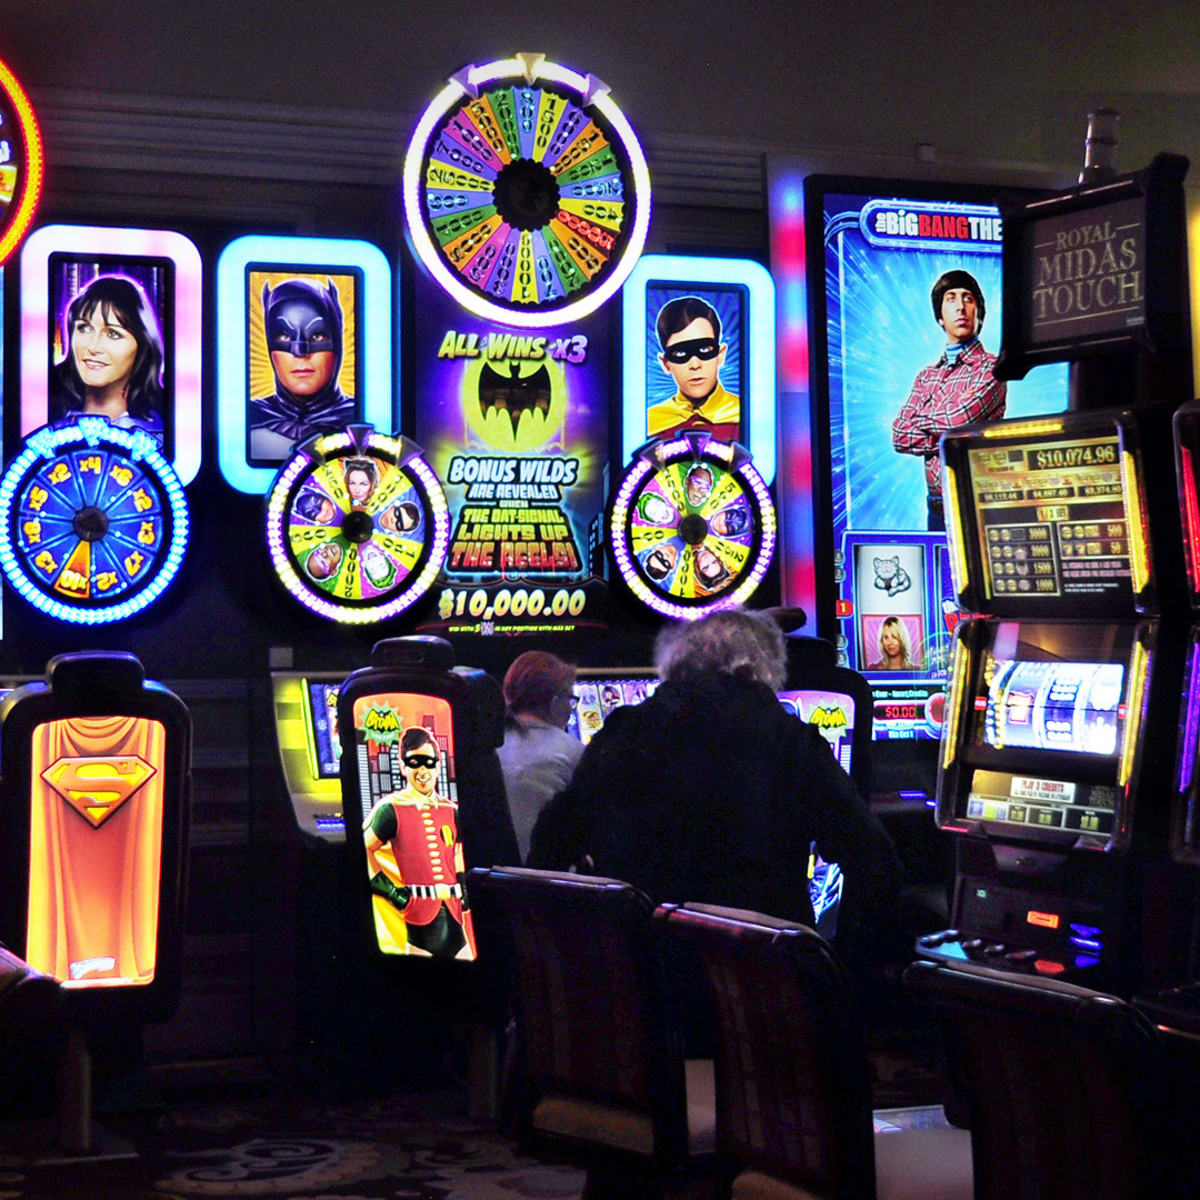 These Las Vegas Strip Slot Machines Pay Out the Most Money - TheStreet